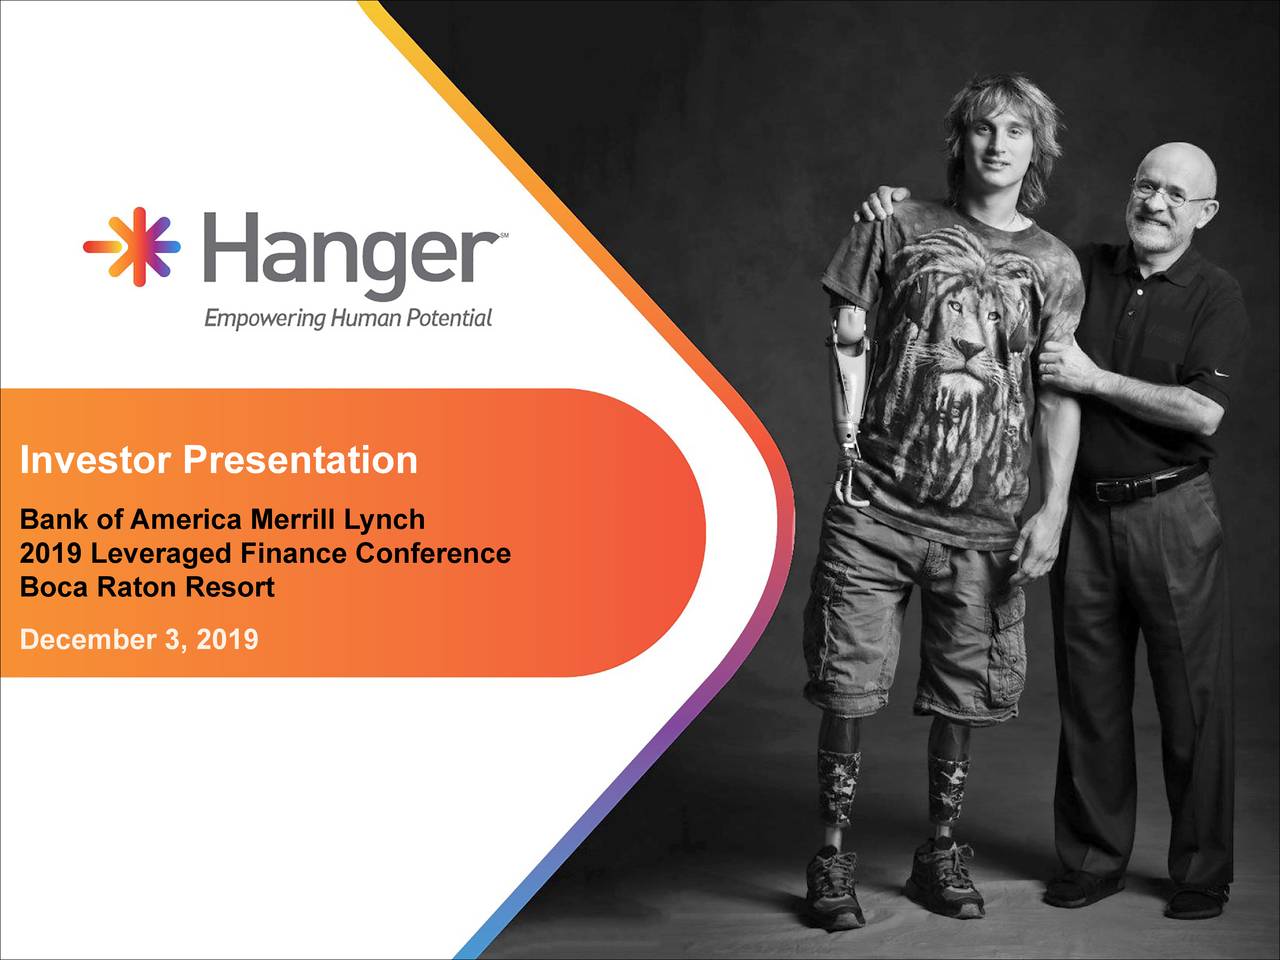 Hanger (HNGR) Presents At Bank Of America Merrill Lynch Leveraged